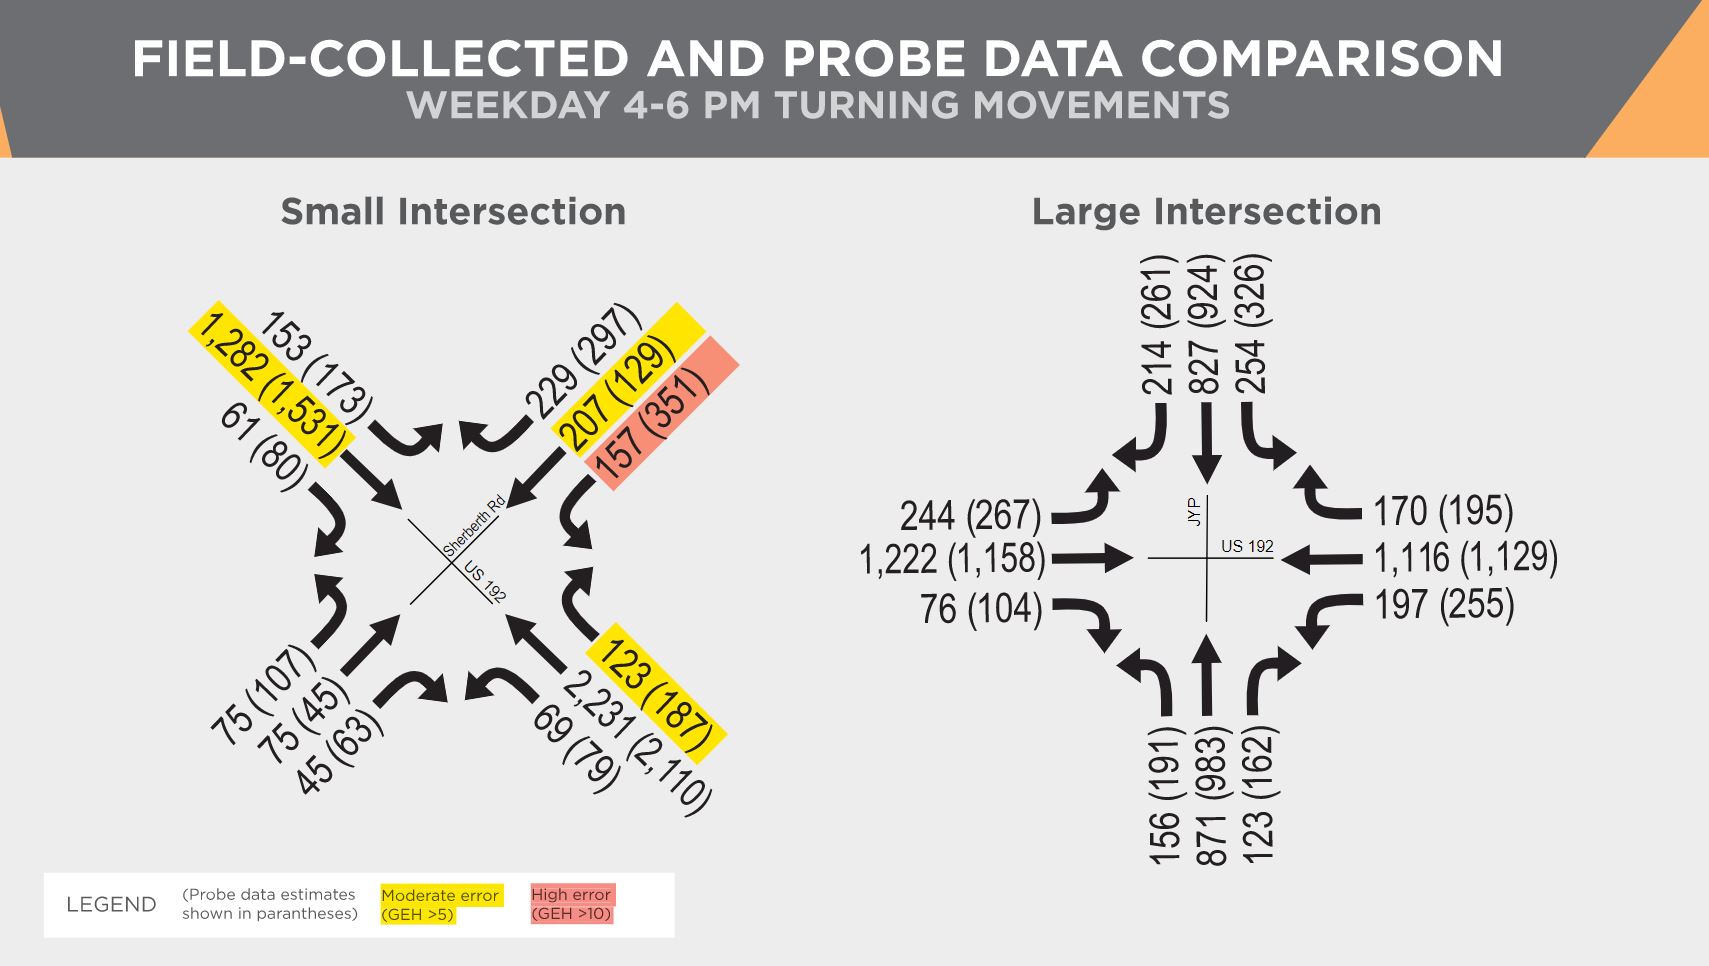 Comparison of turning movements with field-collected vs probe data